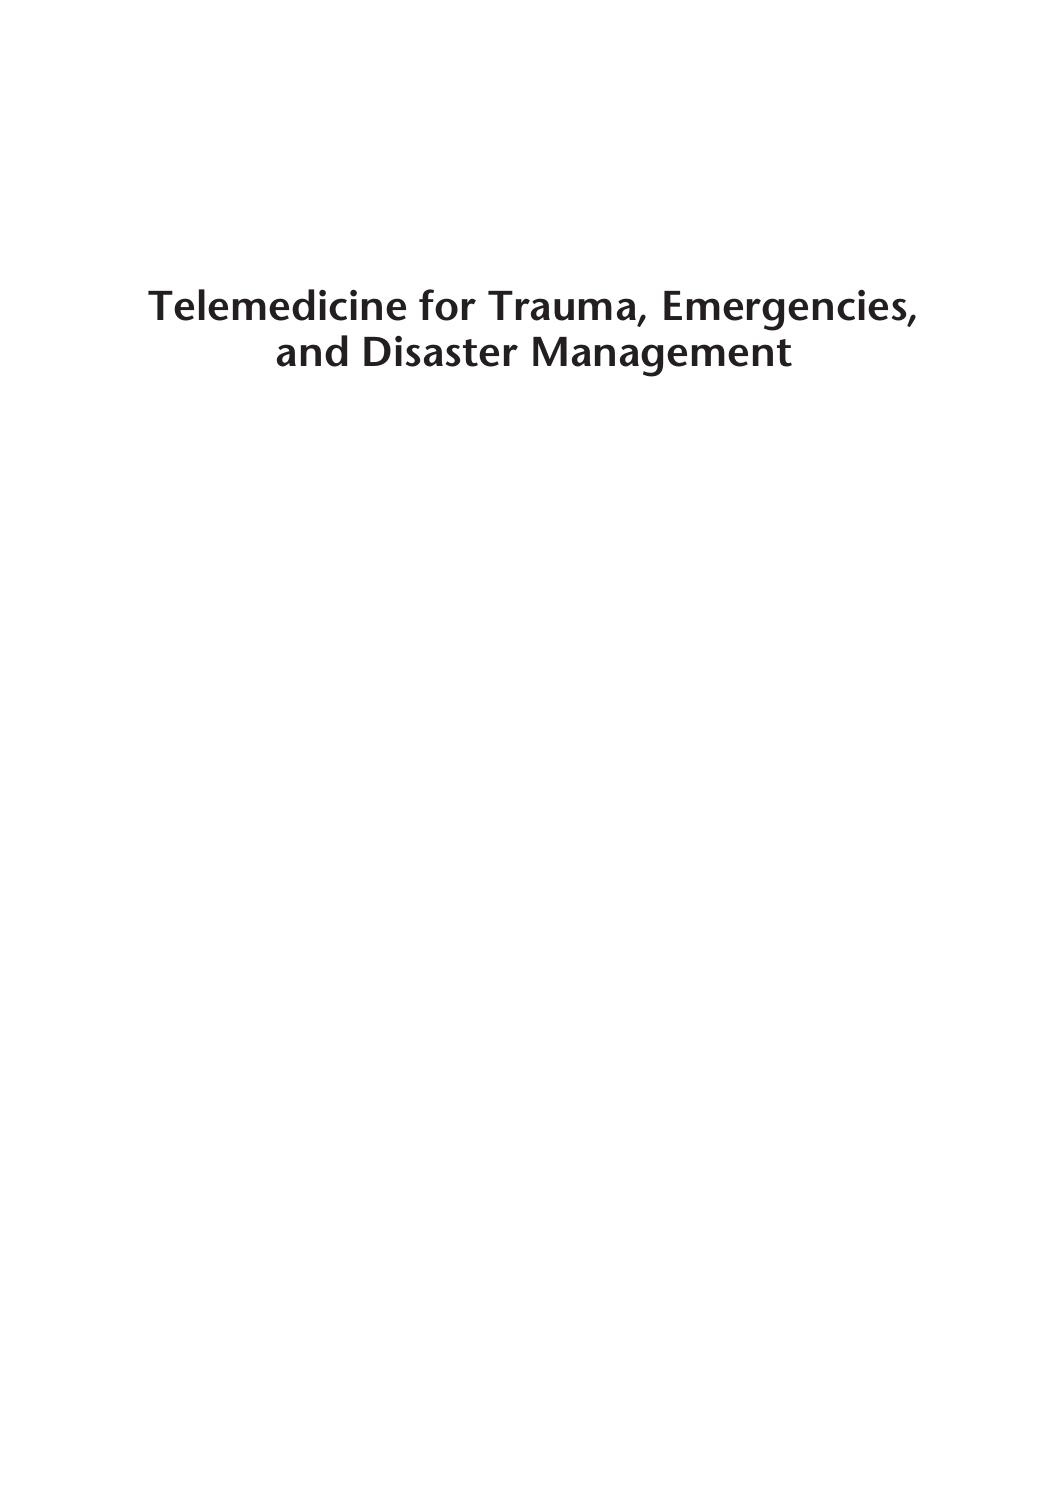 Telemedicine for Trauma, Emergencies, and Disaster Management by Rifat Latifi